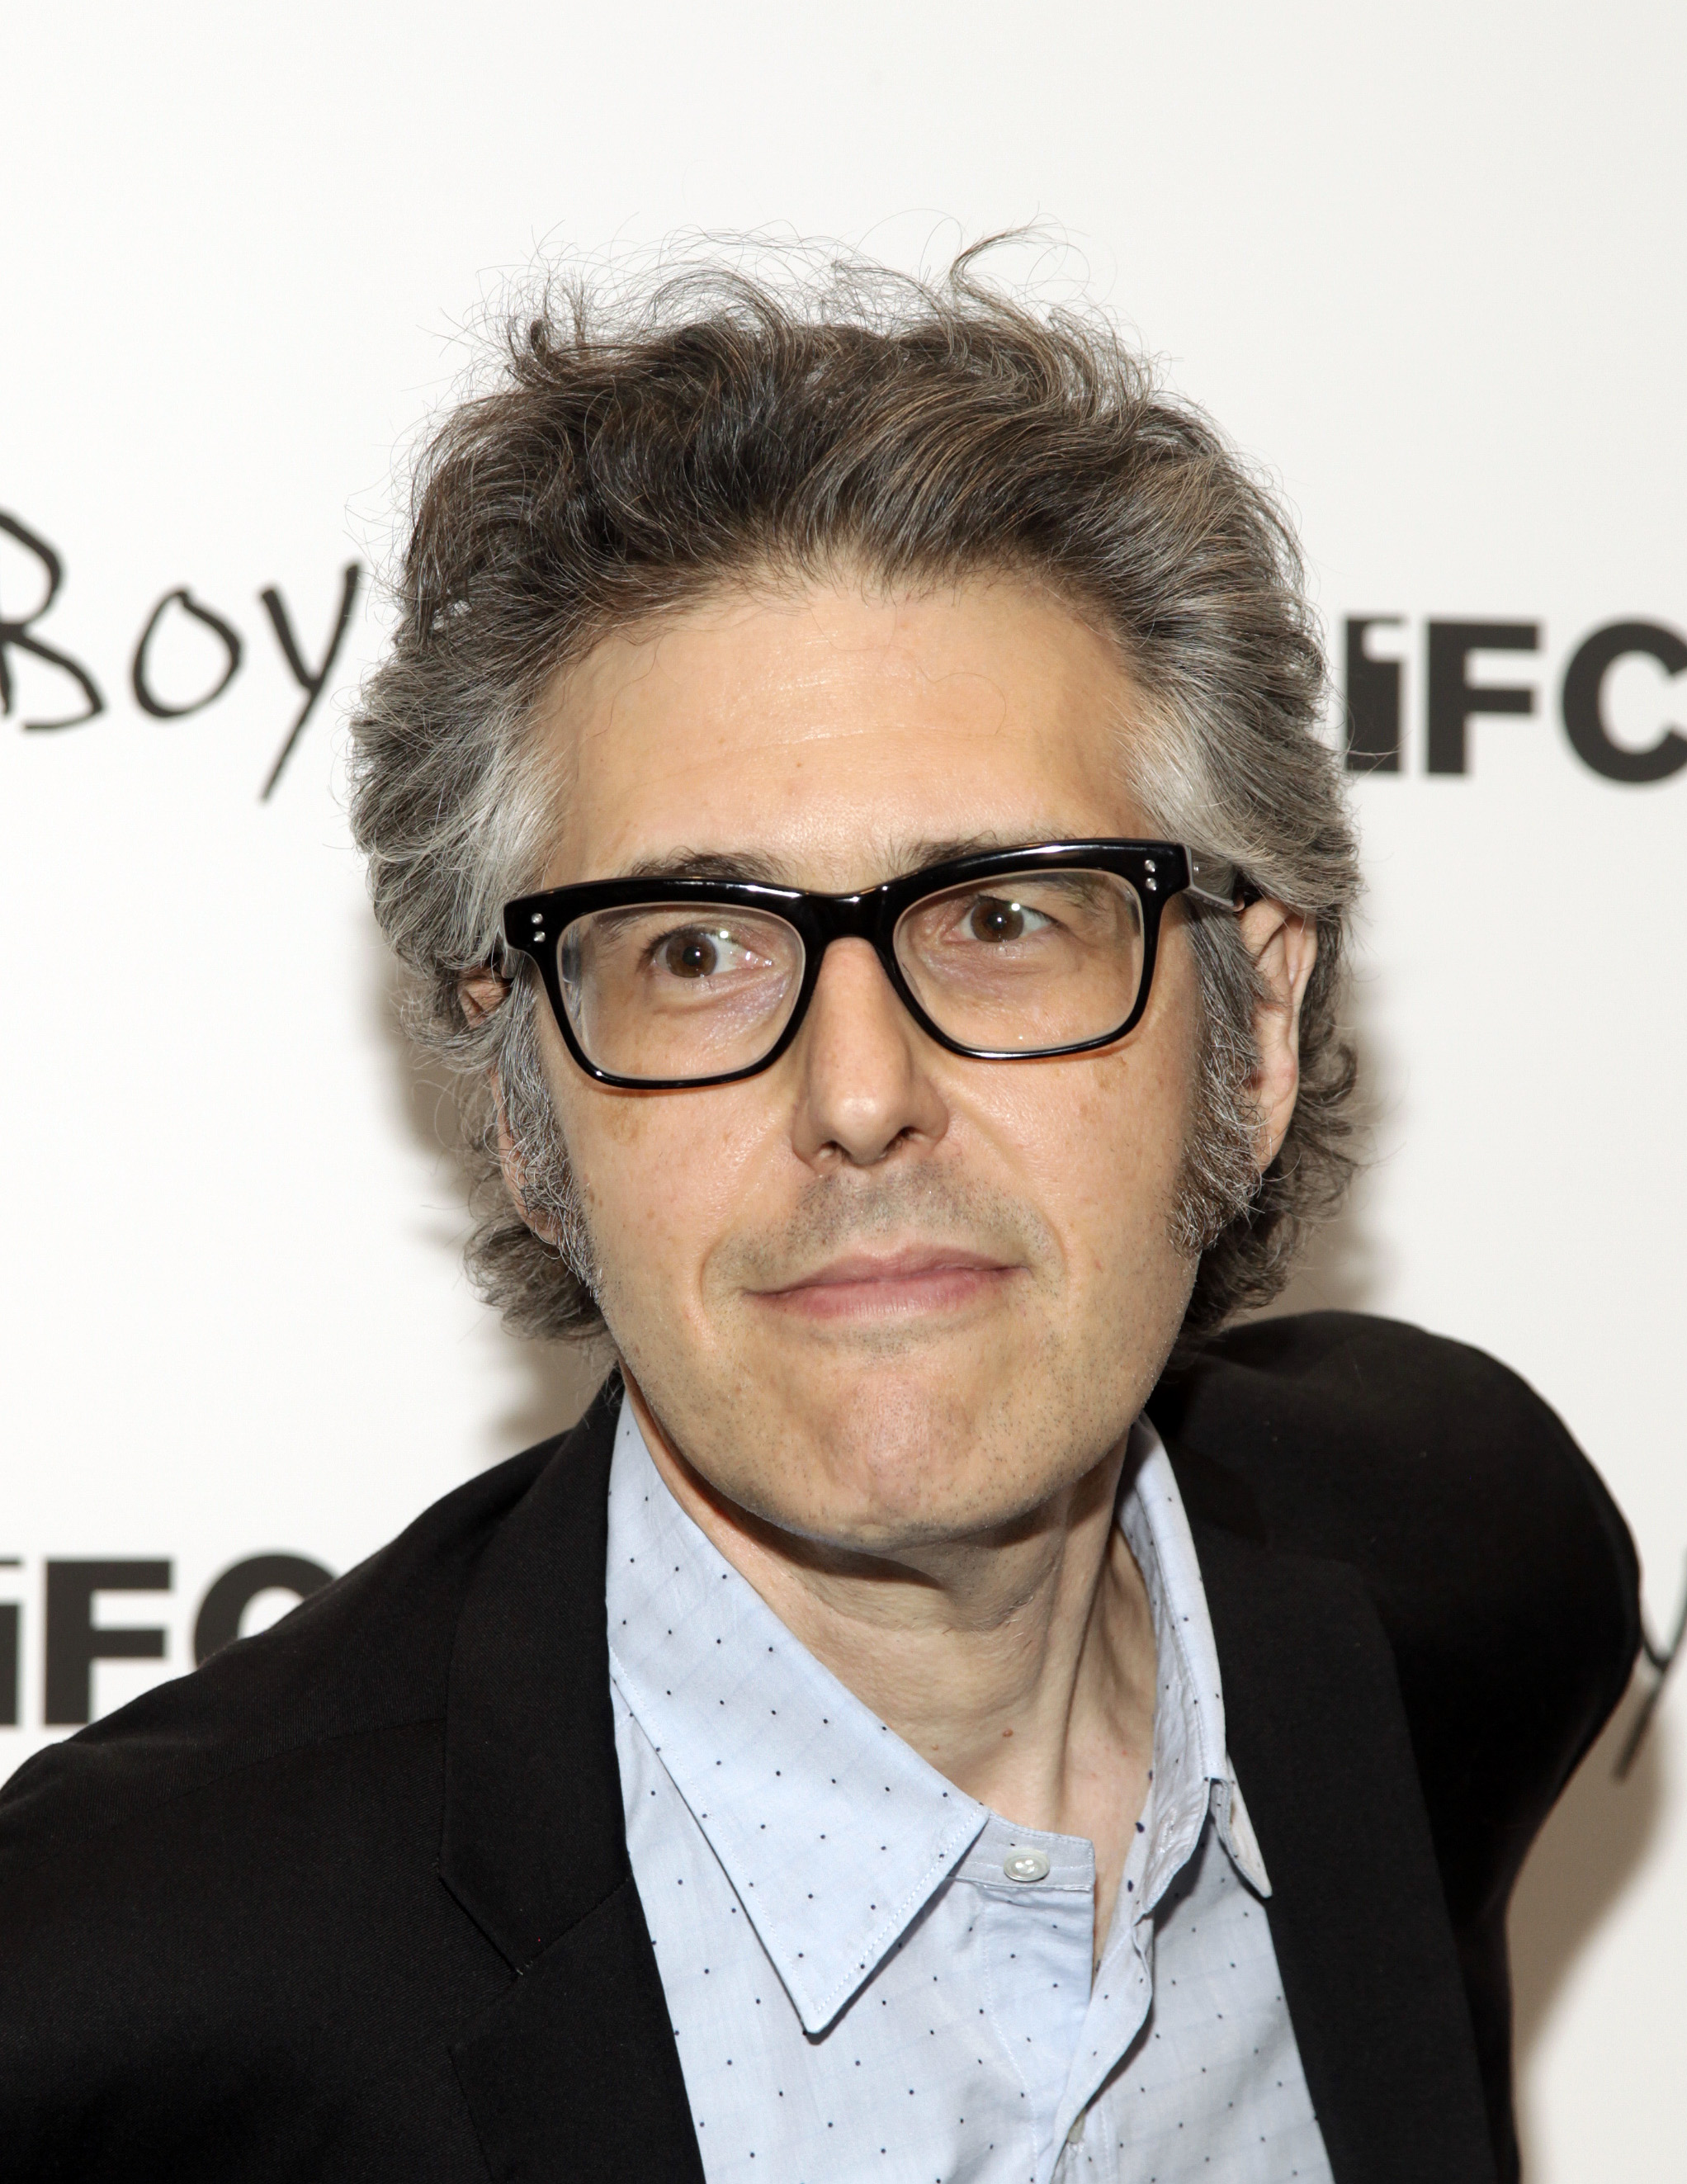 Ira Glass in July 2014, in New York. (Photo by Andy Kropa/Invision/AP)